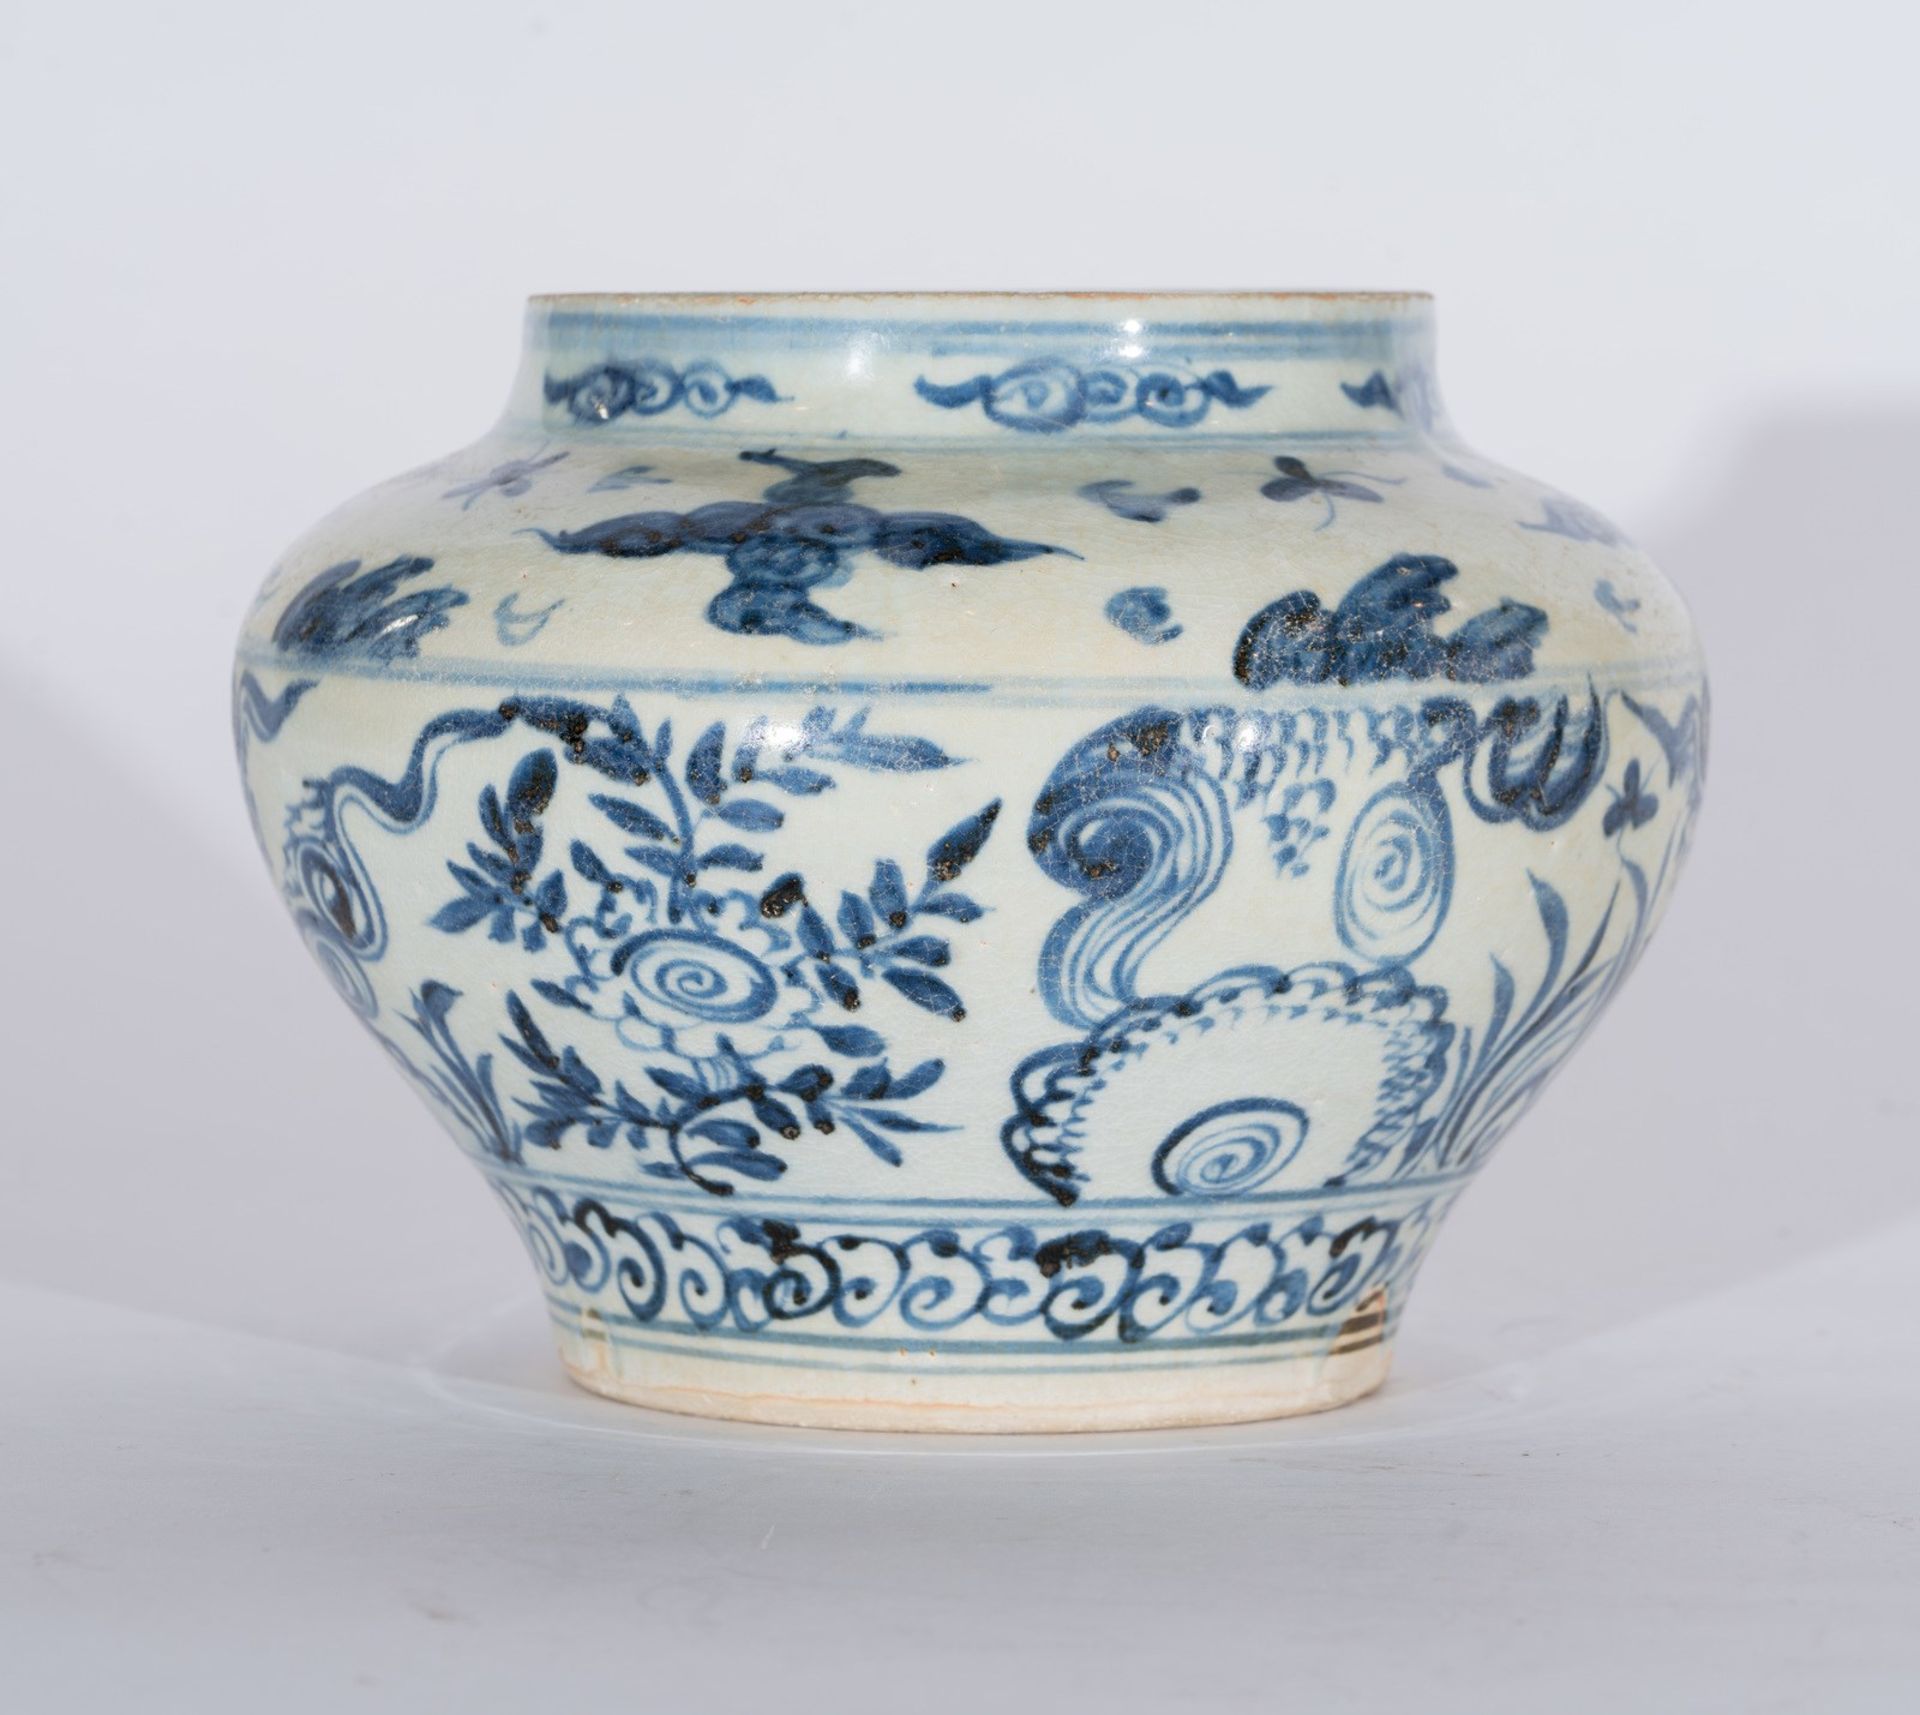 Arte Sud-Est Asiatico A blue and white pottery vase painted with vegetal motifs and clouds Vietnam,